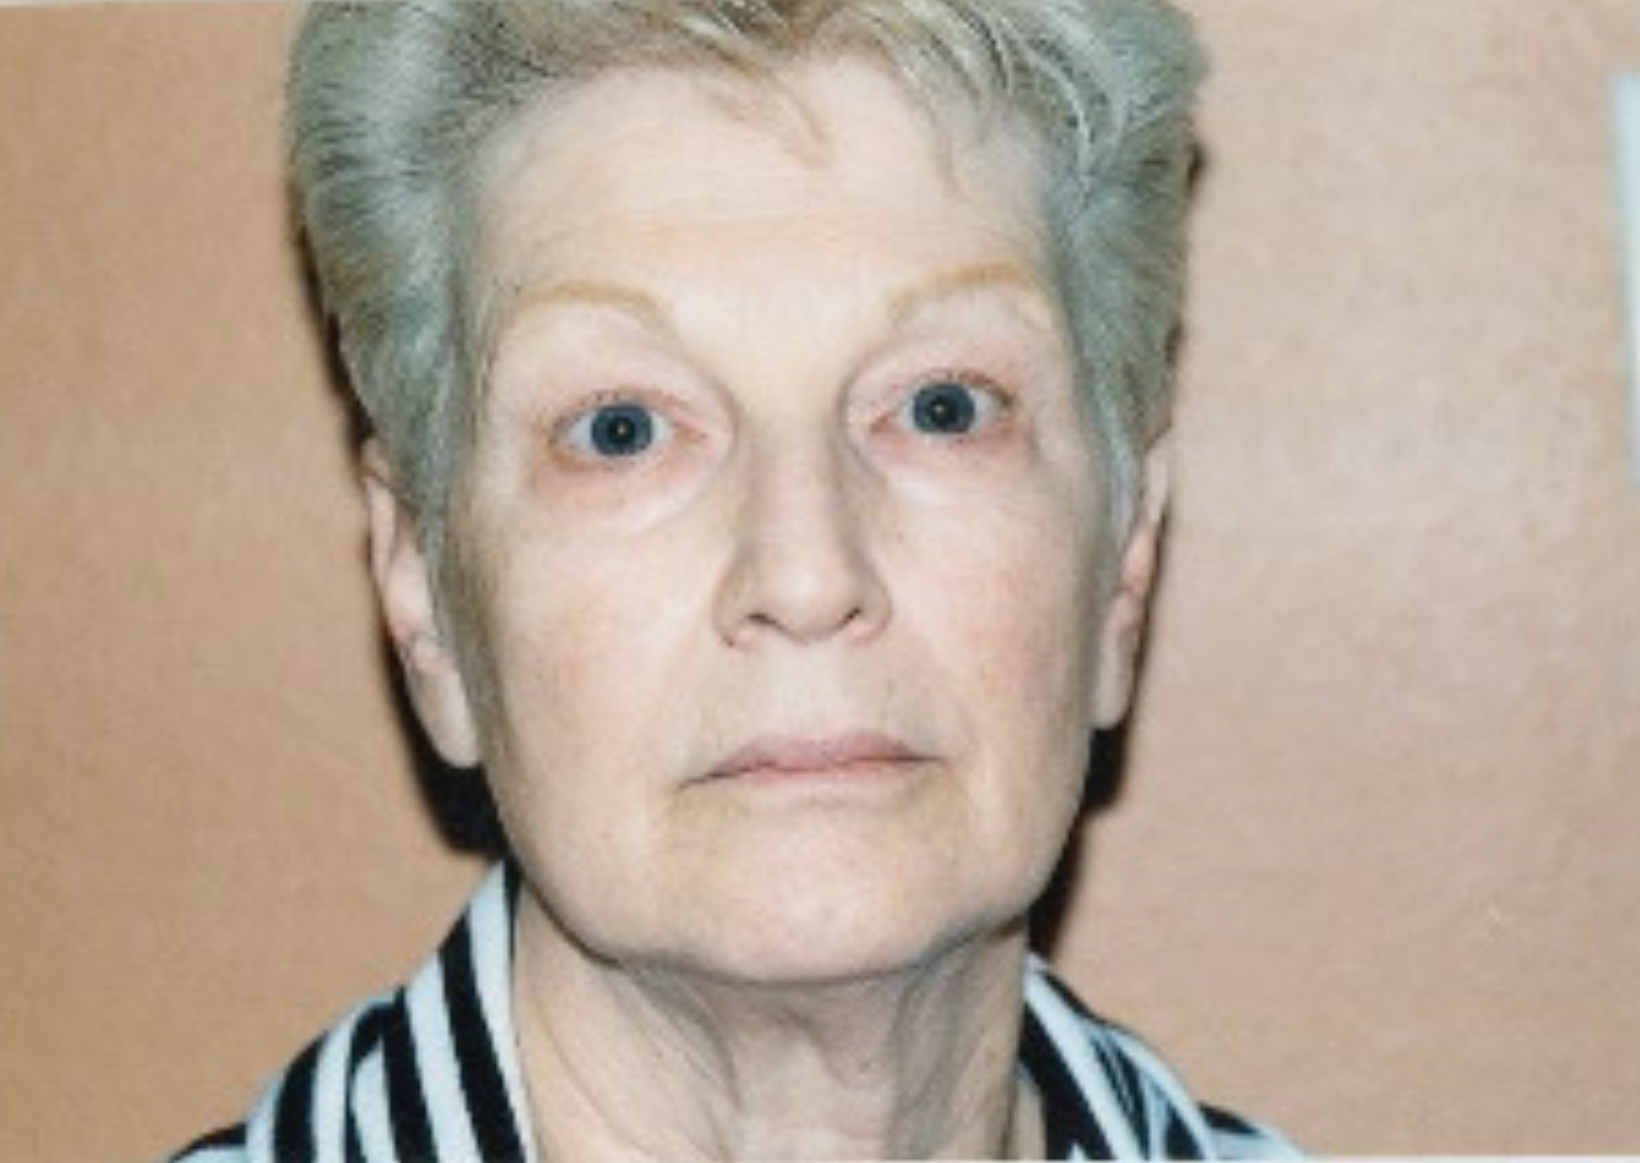 A close up of a woman 's face with a striped shirt on